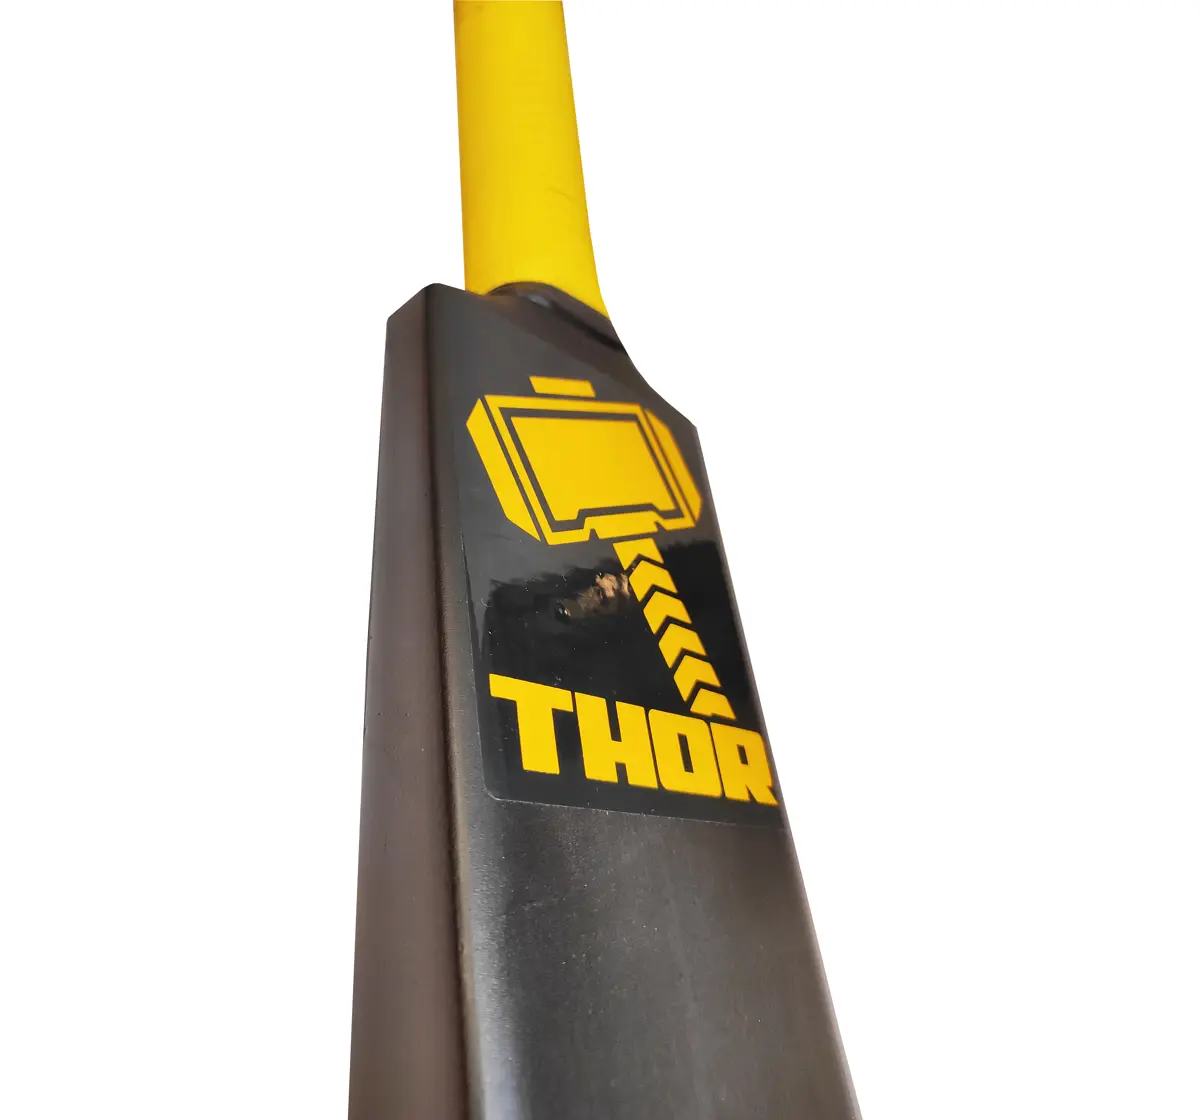 Starter Thor Cricket Bat And Ball Set Size 1 Multicolour, 3Y+